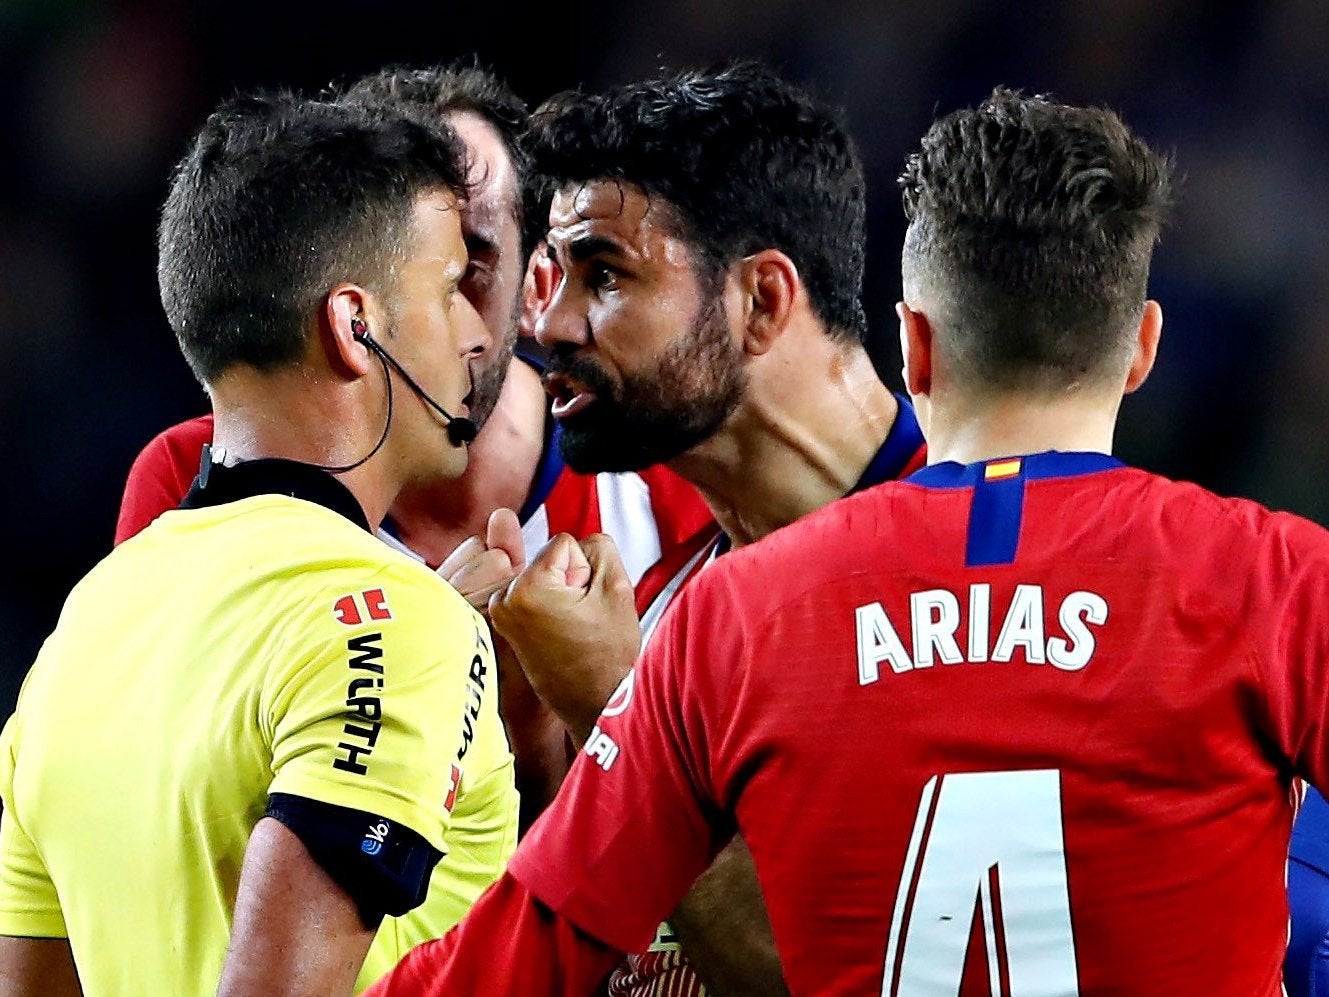 Barcelona vs Atletico Diego Costa as Atleti Independent | Independent